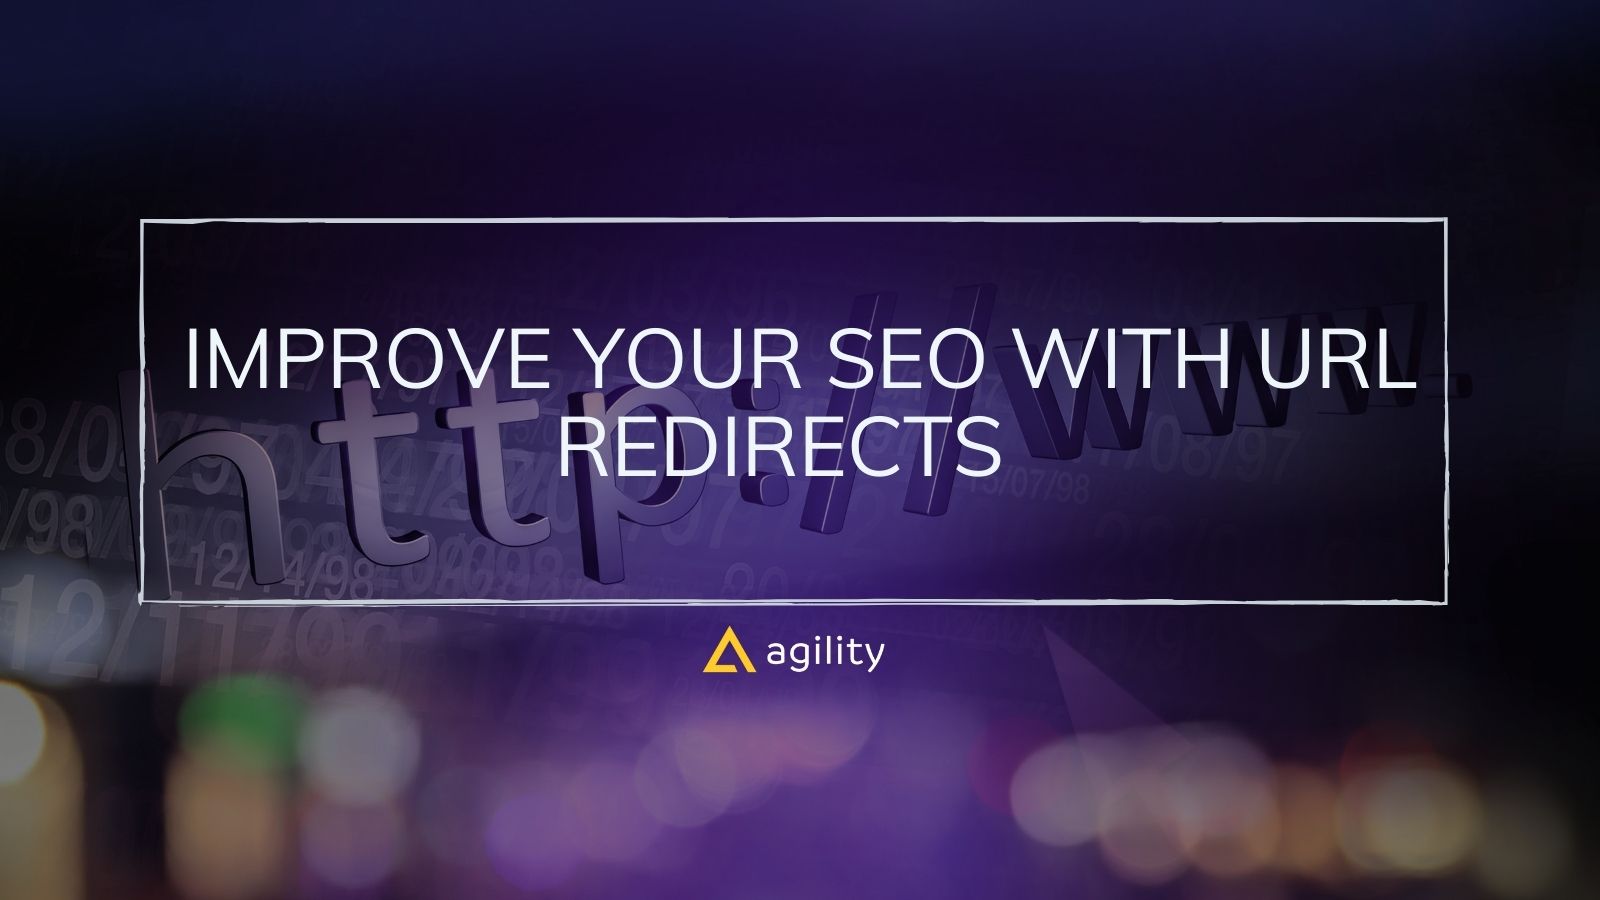 Using URL redirects to improve SEO 